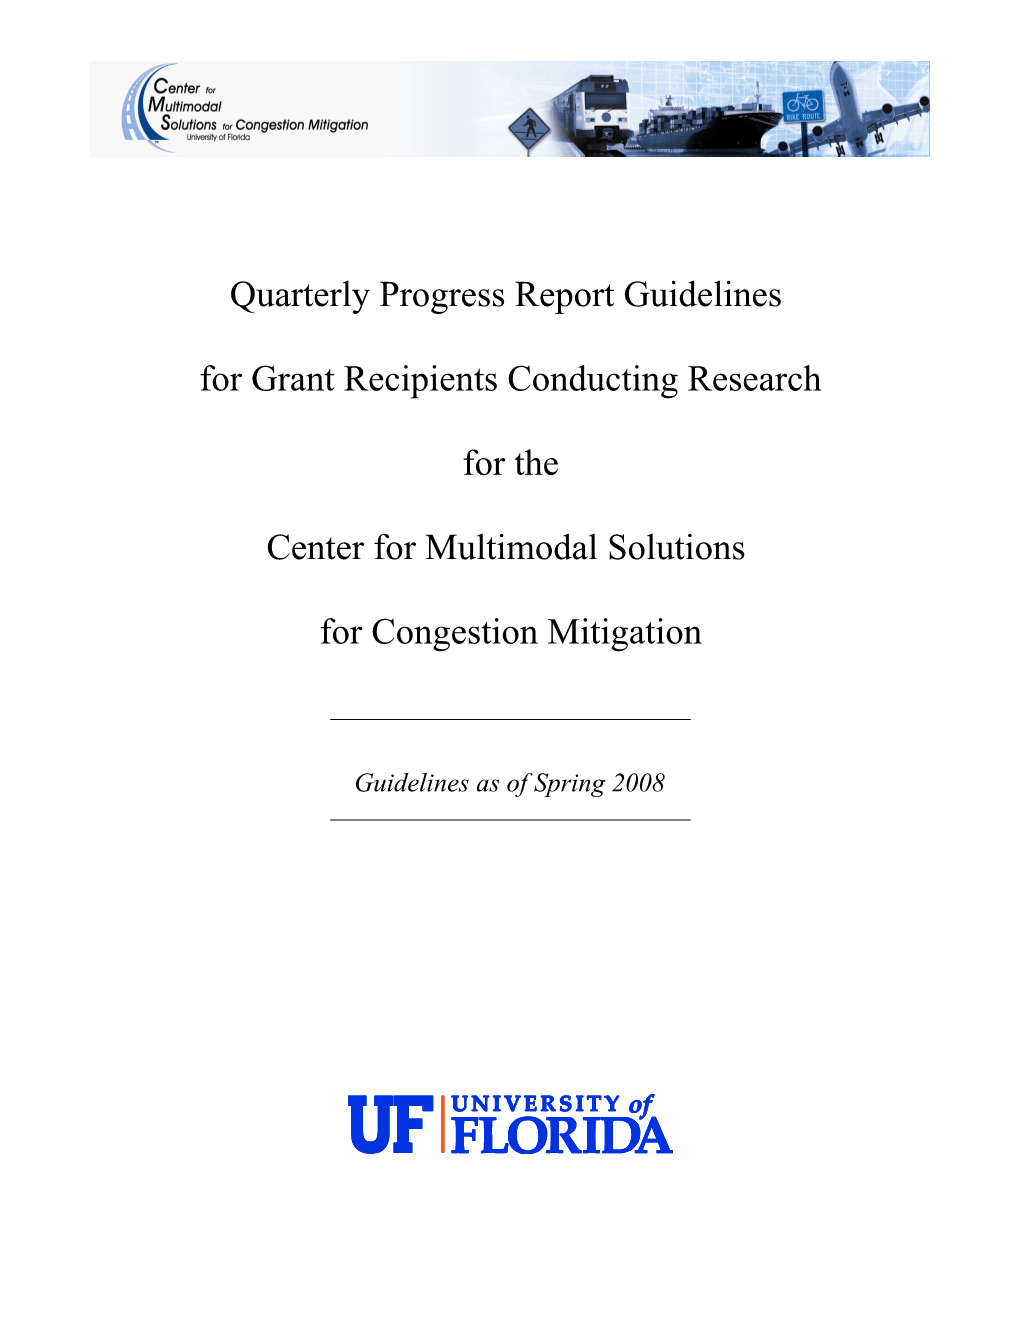 Quarterly Progress Report Guidelines For Grant Recipients Conducting Research